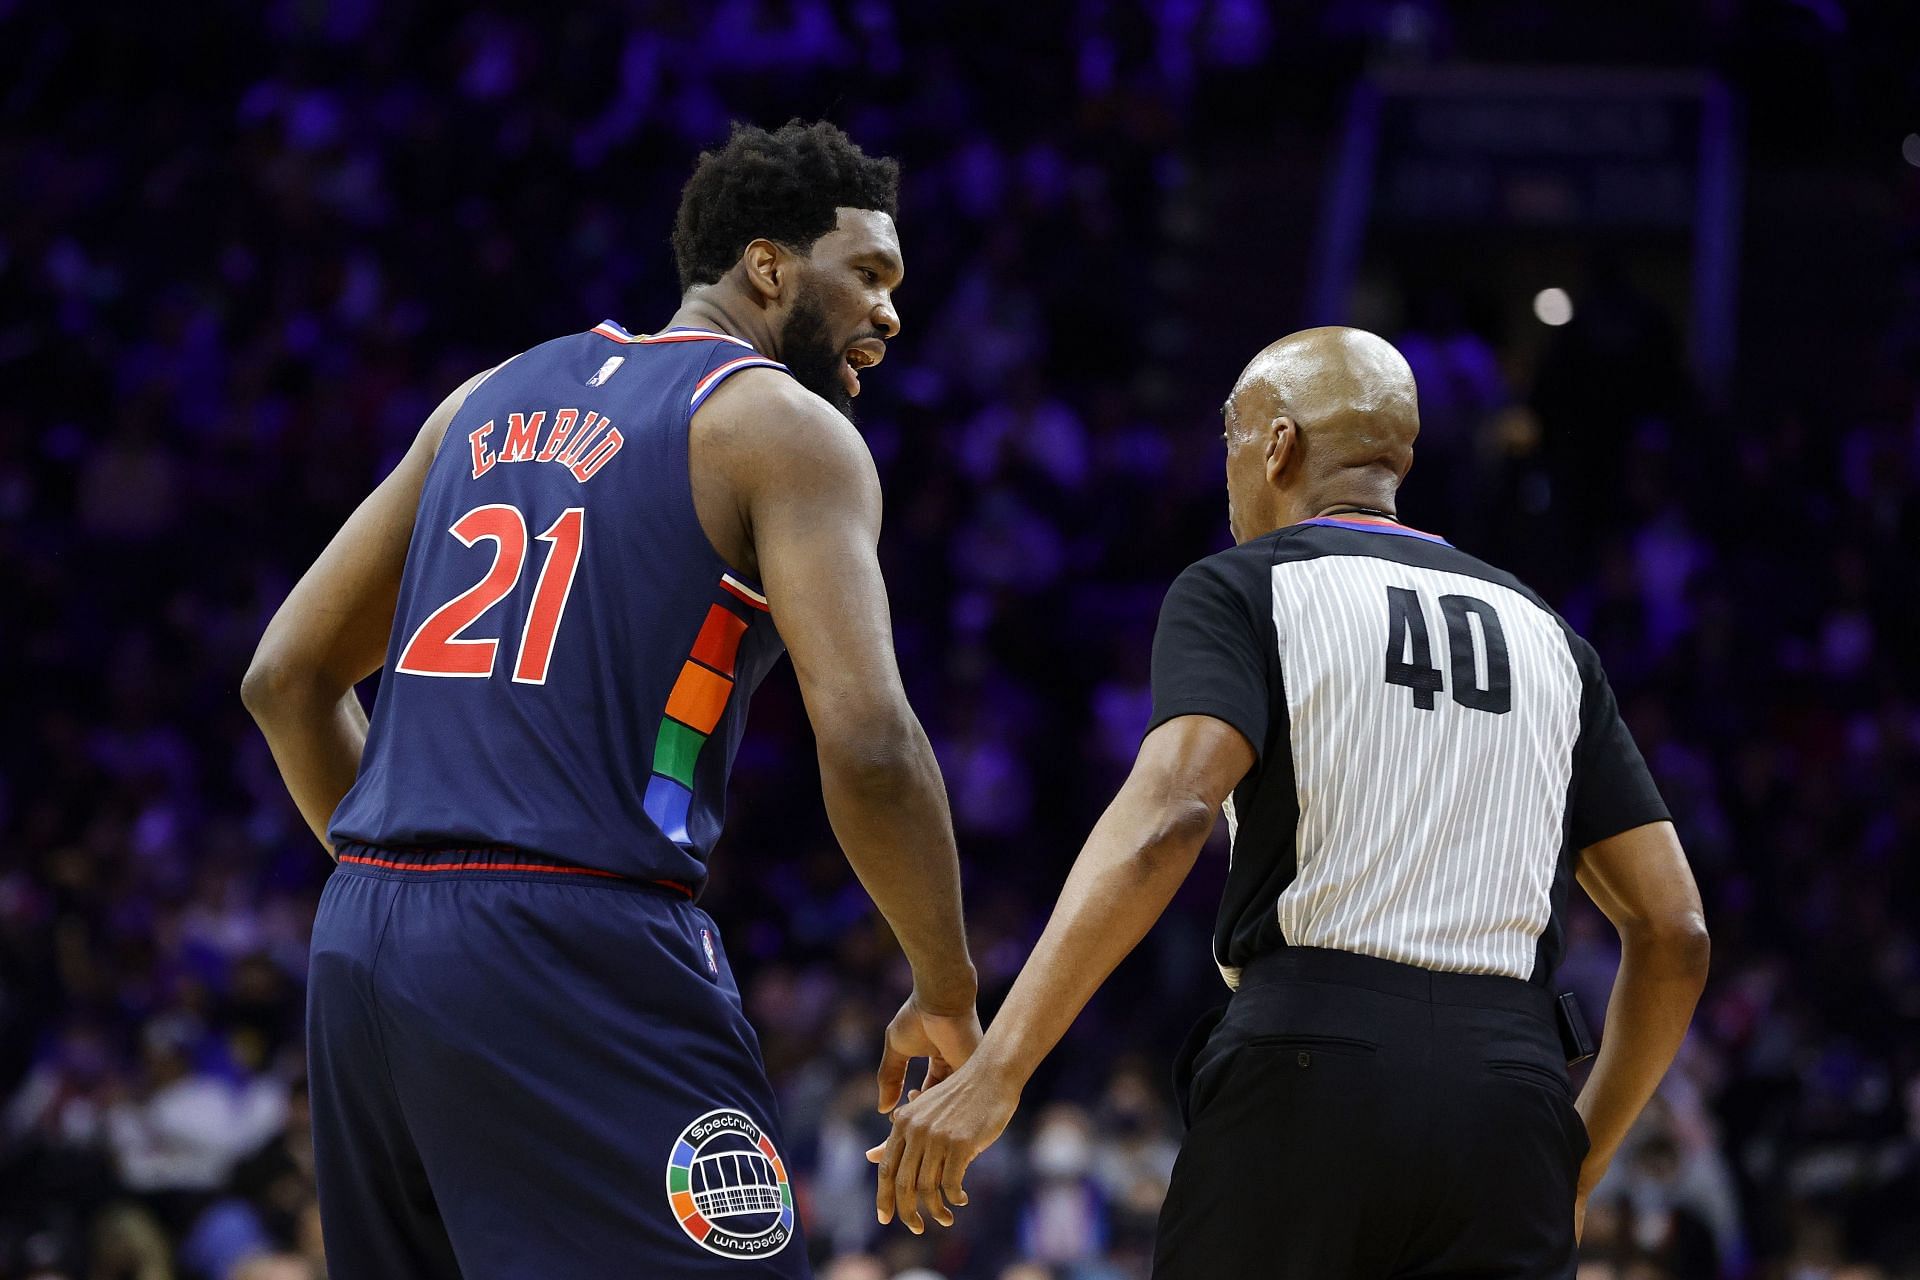 “He’s already taking Shaqtin’ lessons from The Beard” – Shaquille O’Neal jokes about Joel Embiid’s failed step back 3